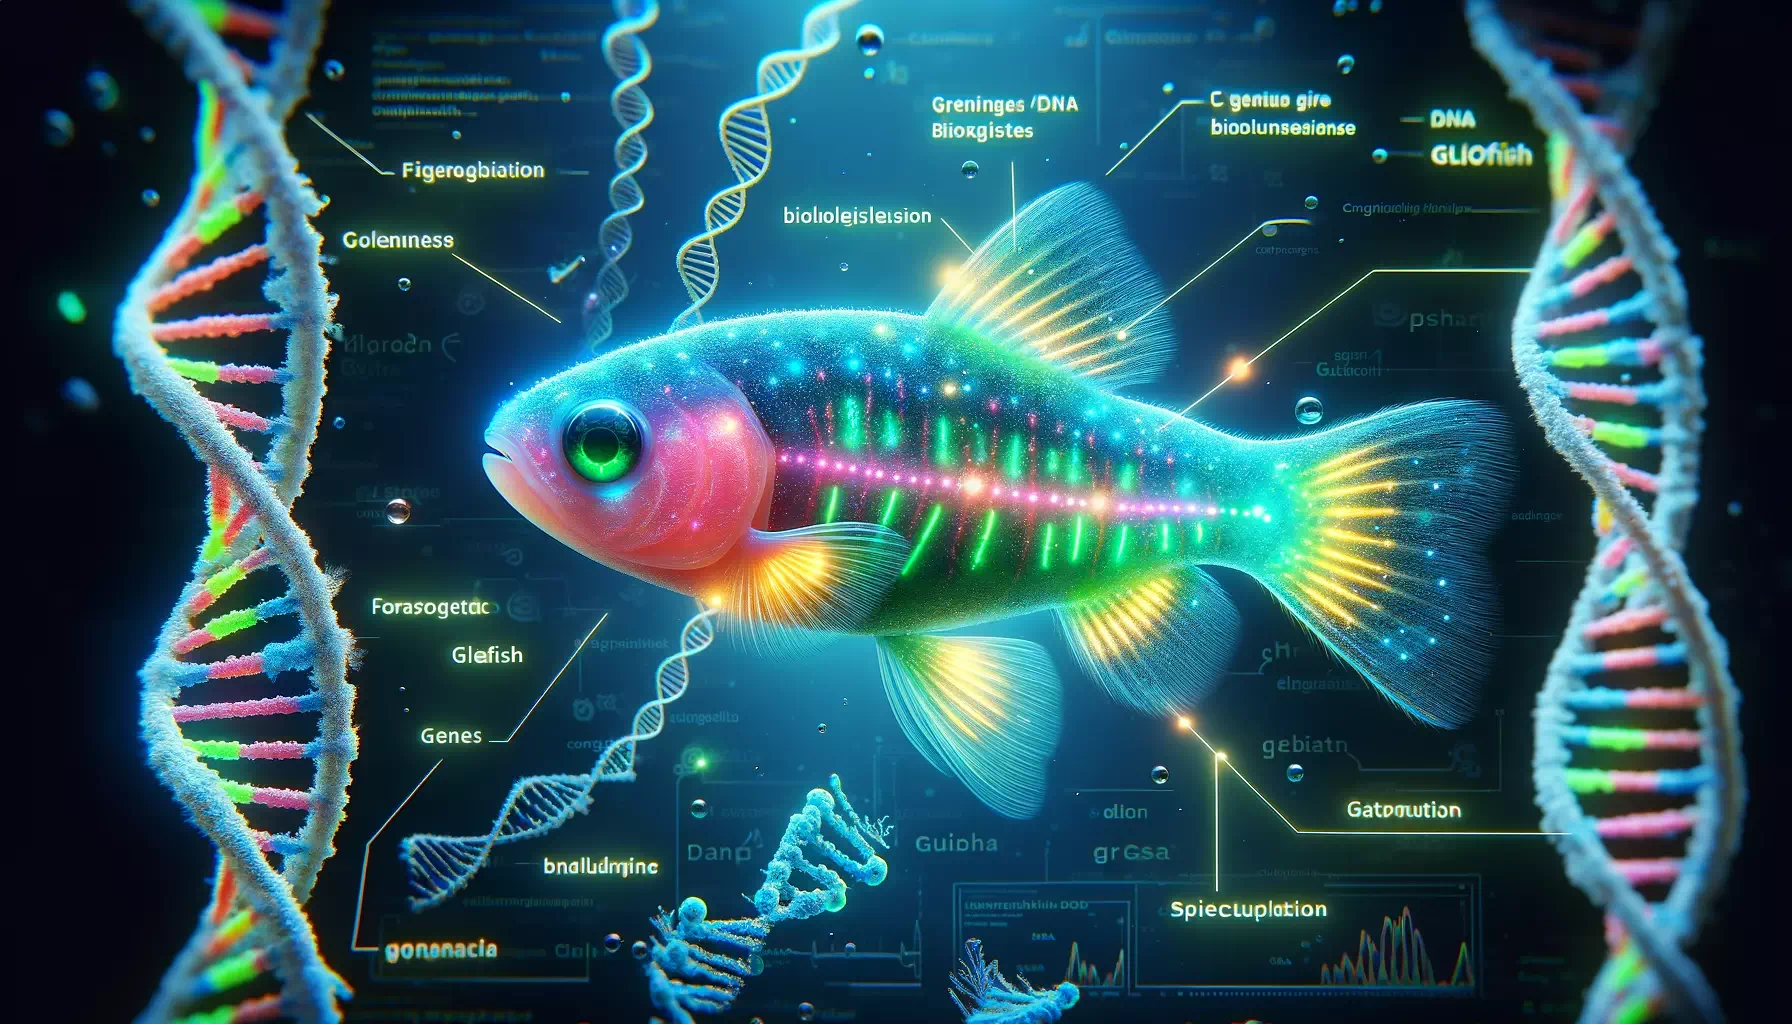 visualizing the genetic modification and genes in GloFish. The image features a close-up view of a GloFish w